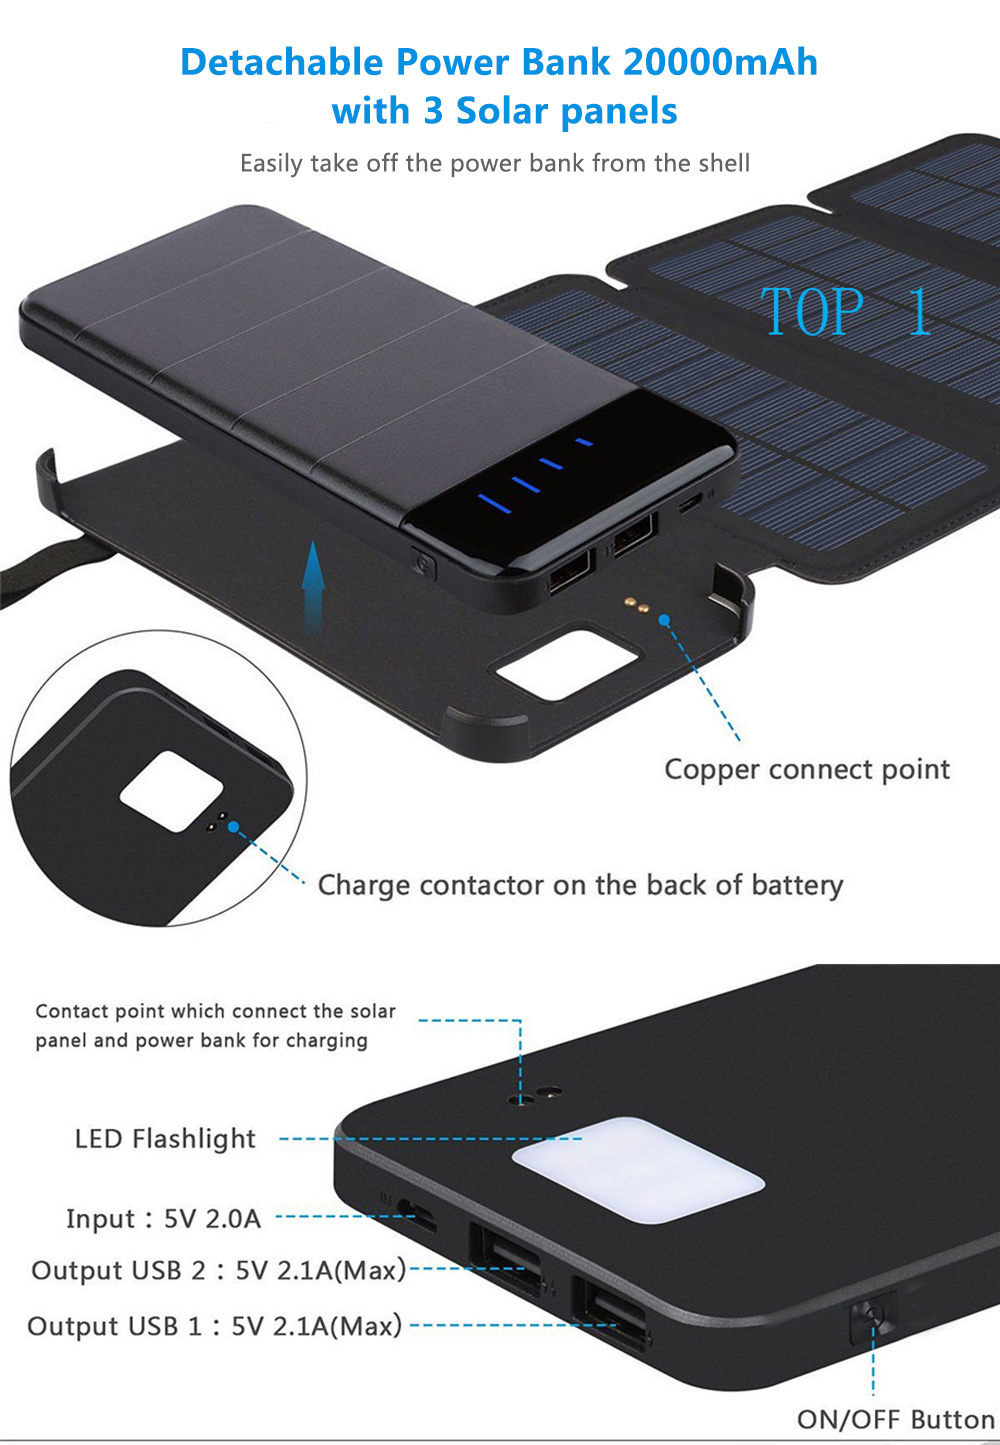 Outdoor Solar Charging Panel Removable Folding Mobile Phone Charger